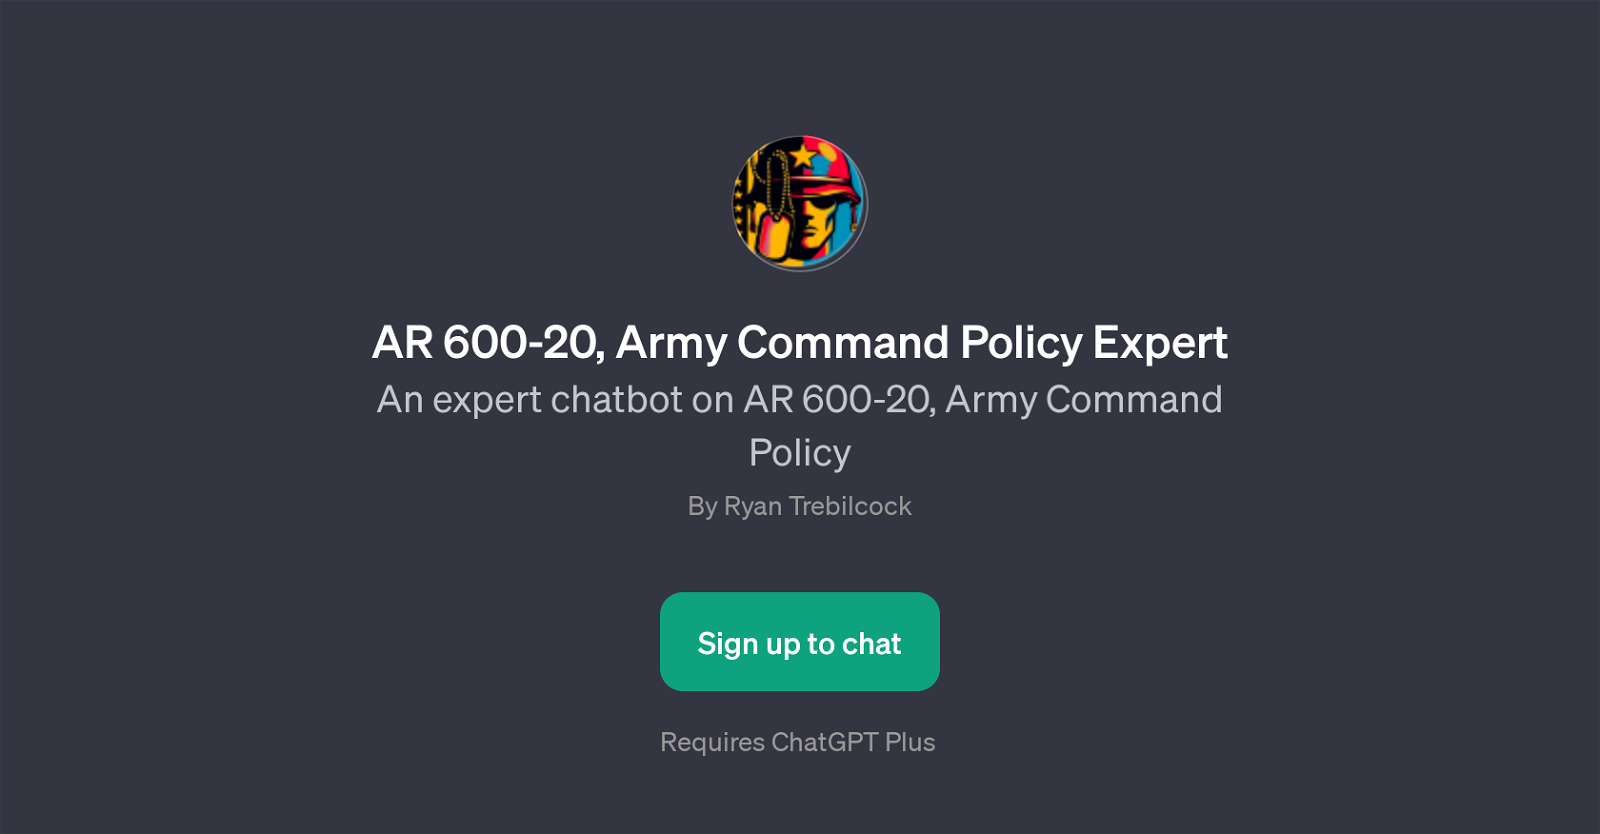 AR 600-20, Army Command Policy Expert website